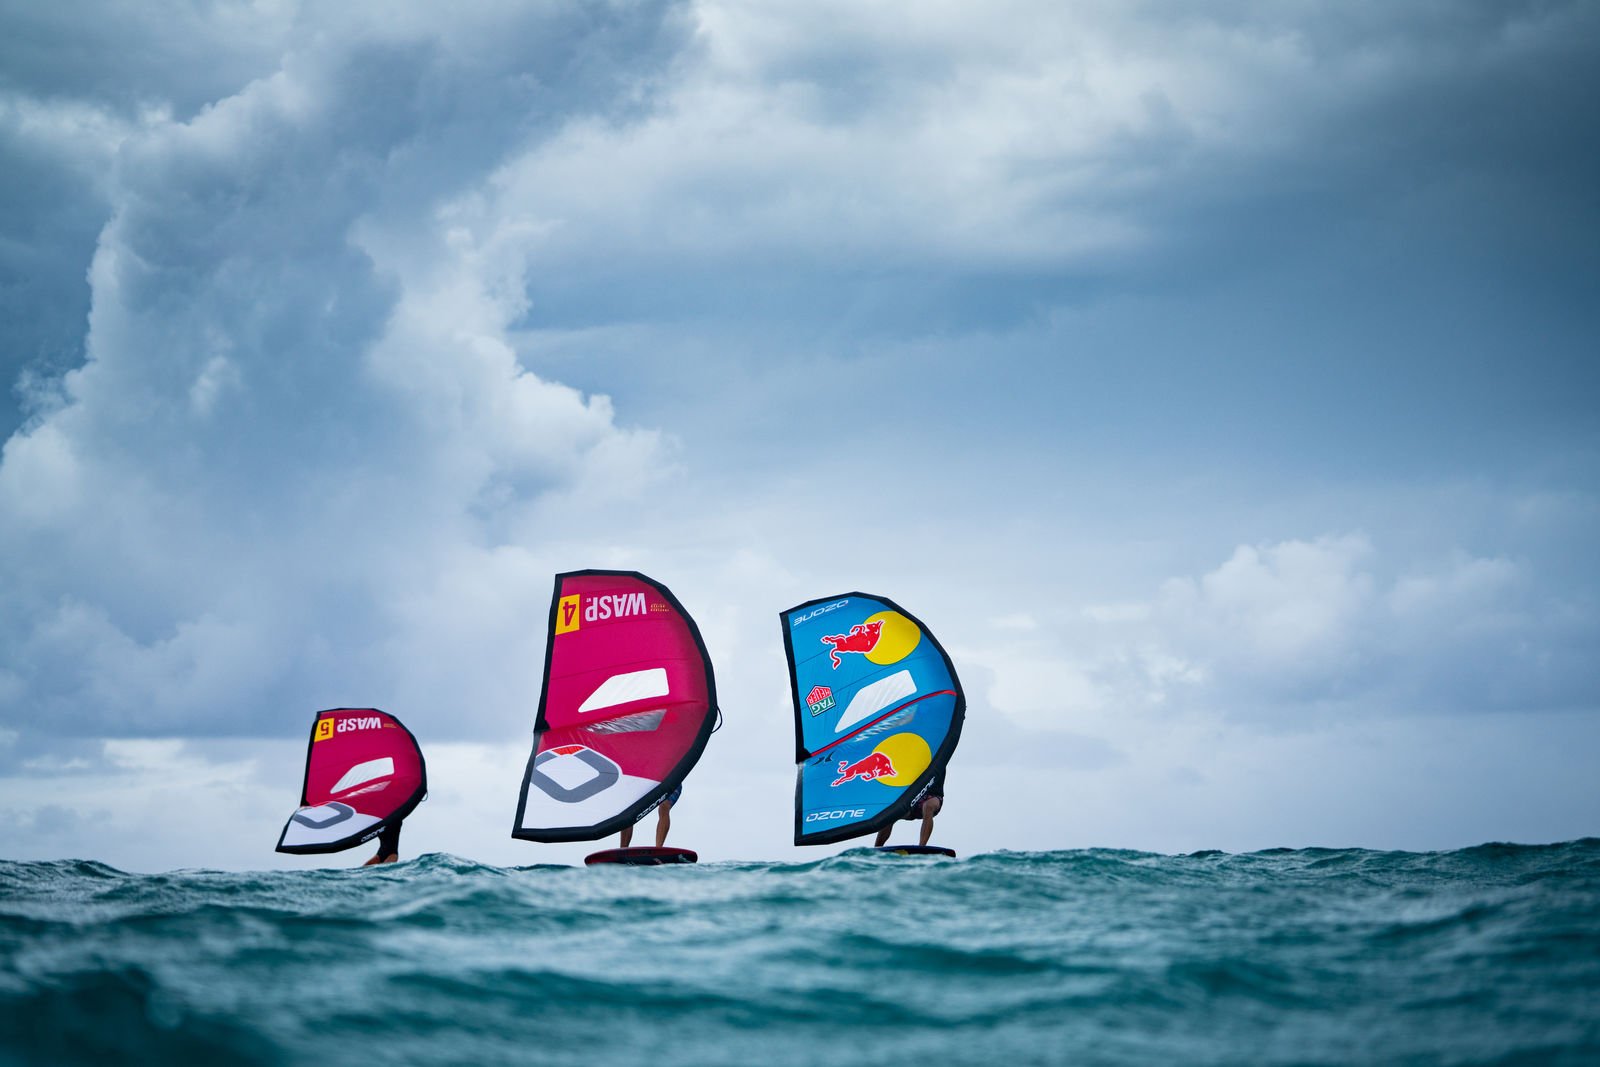 The Ozone Wasp V2 Wing Review: 4m, 5m, 6m - The Watersports Centre